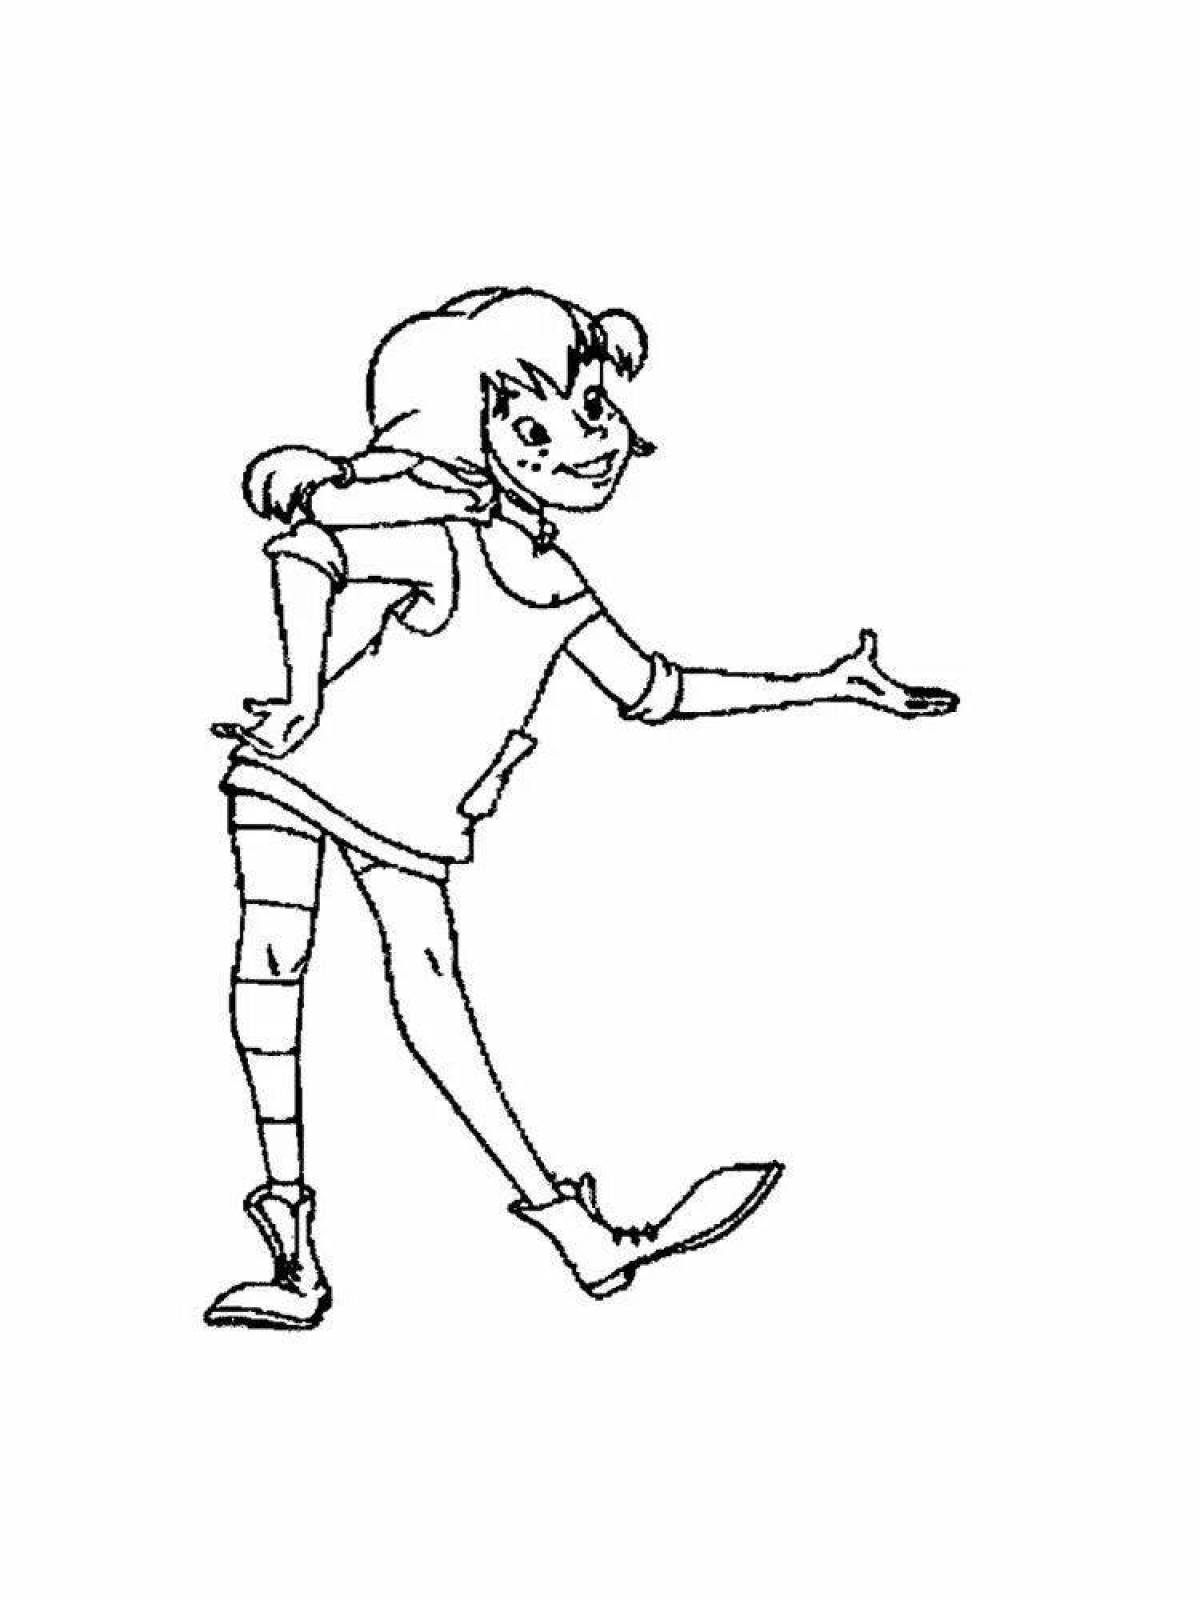 Amazing pippi longstocking coloring page